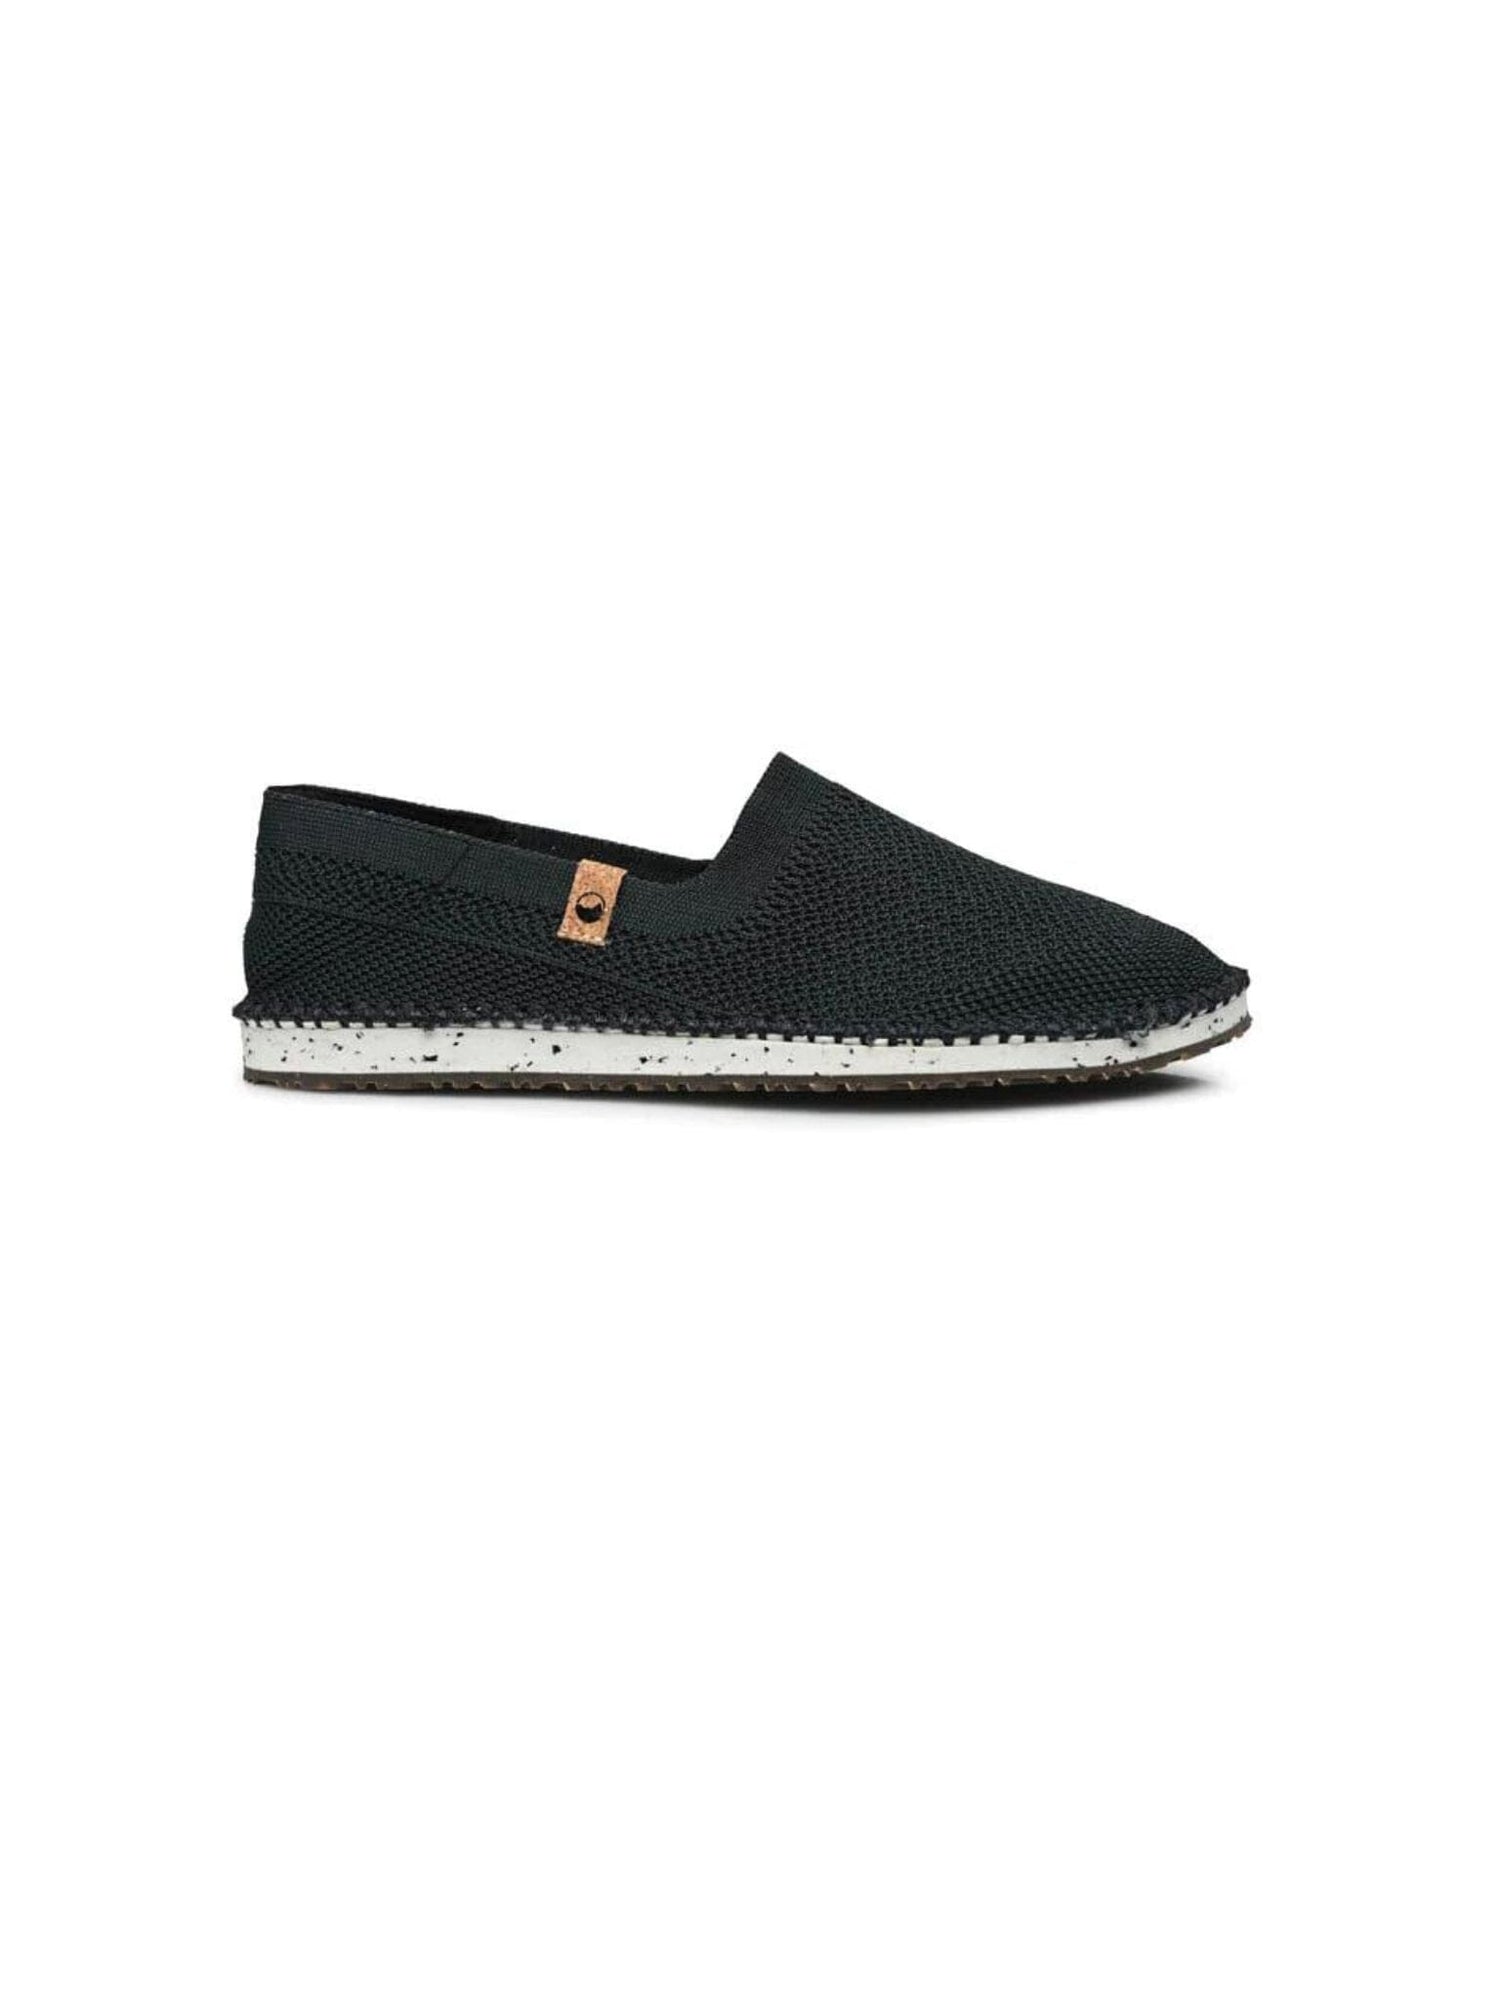 Saola W's Sequoia - Recycled PET Black Shoes